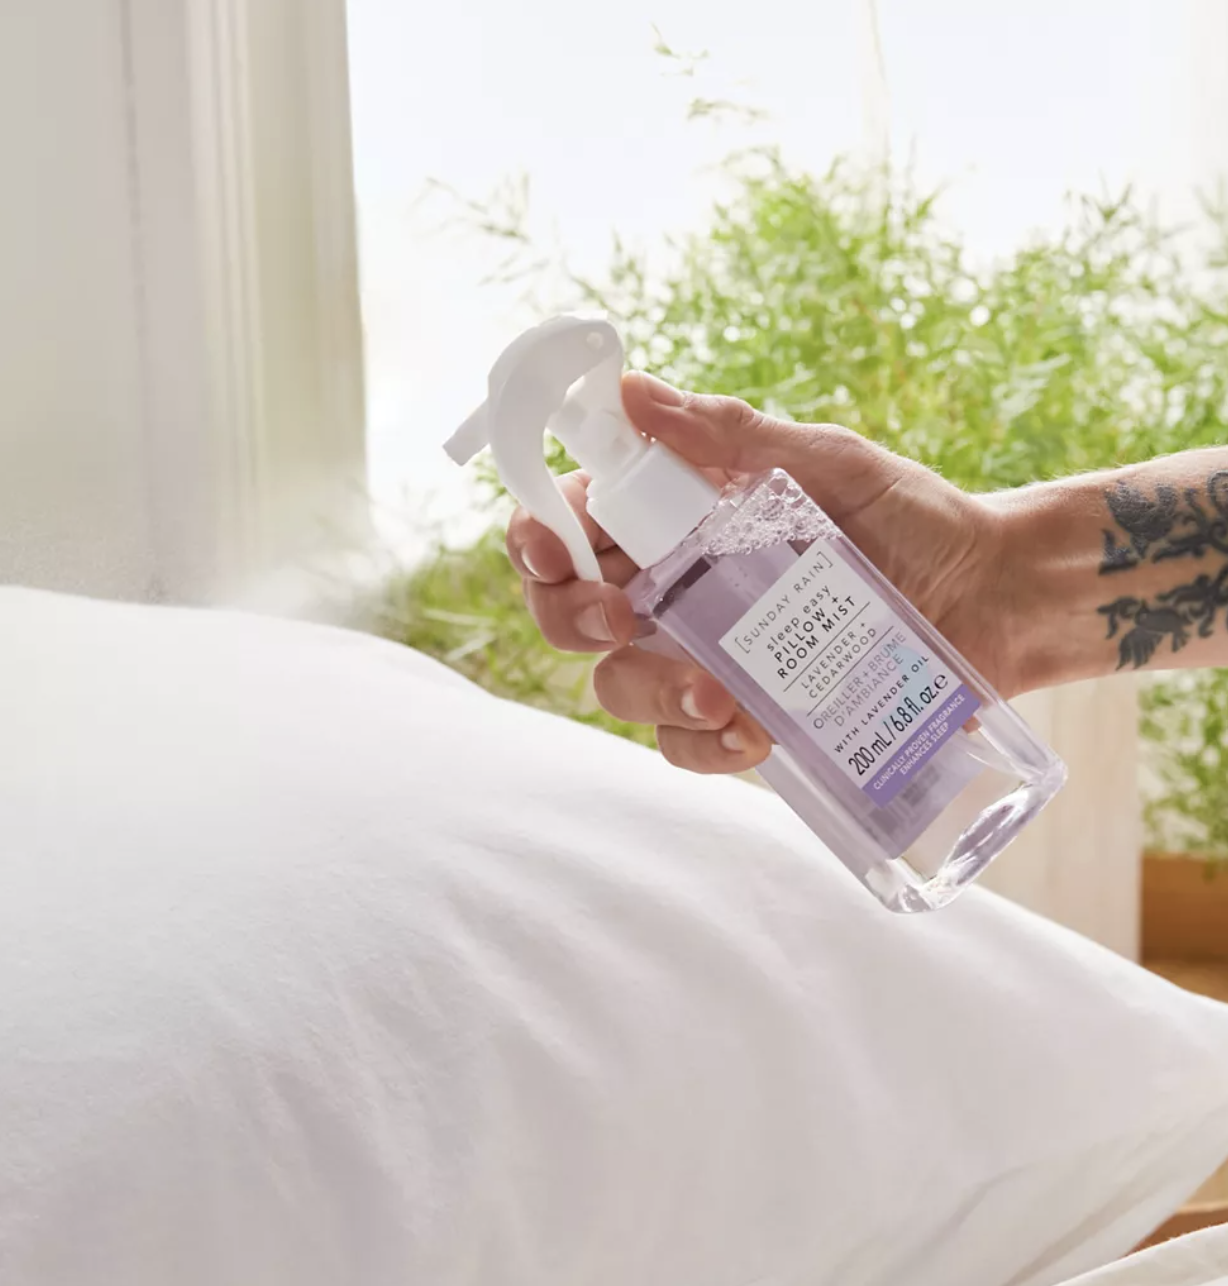 A person spritzing a pillow with the spray